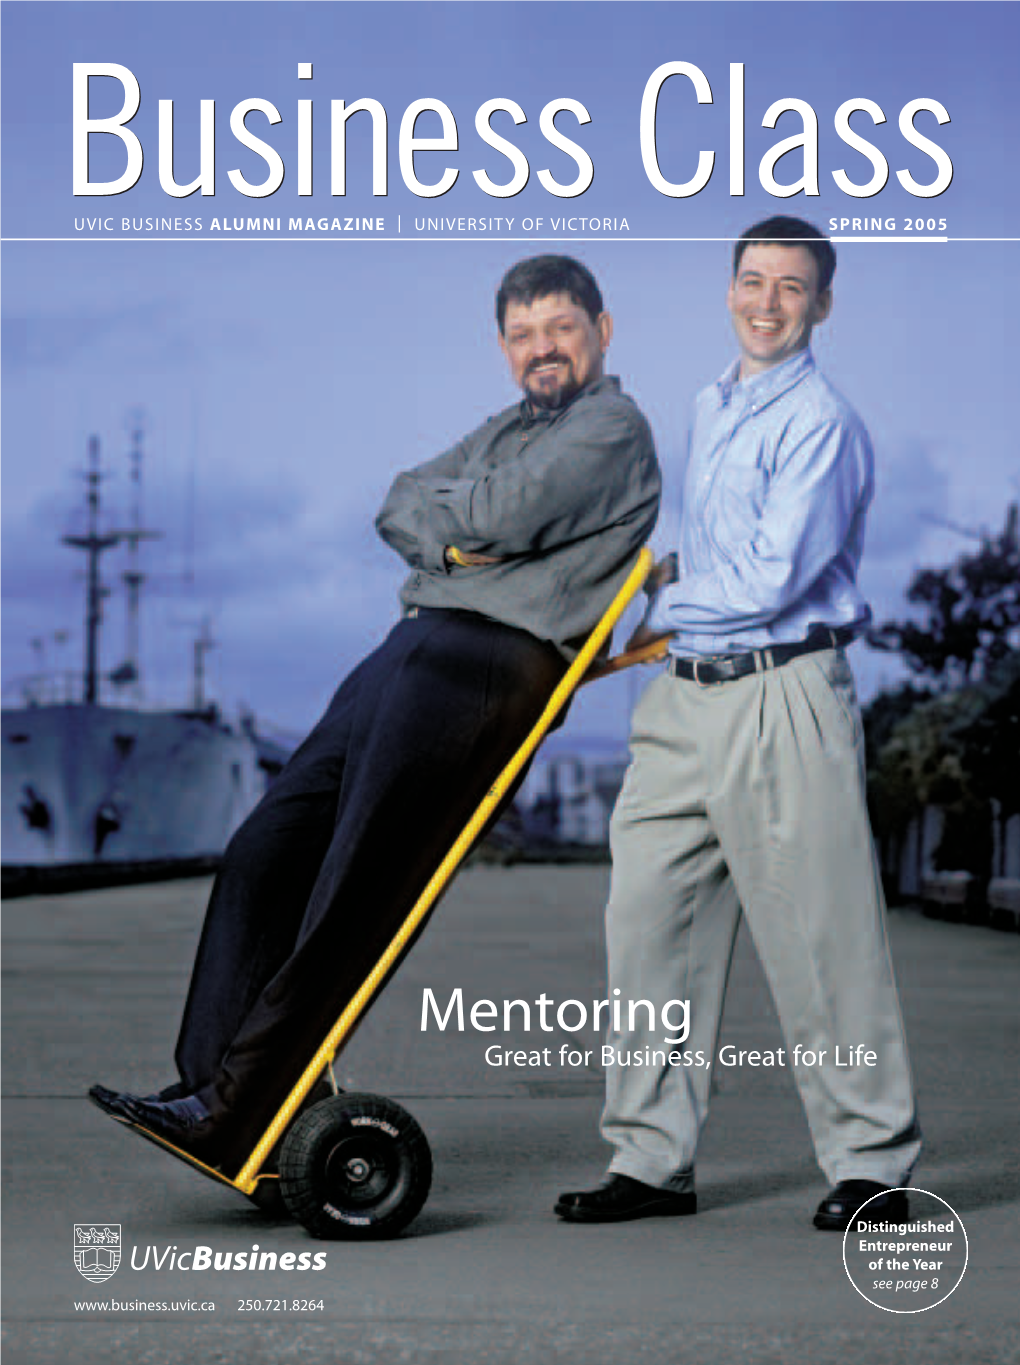 Uvic Business Business Class Magazine, Spring 2005